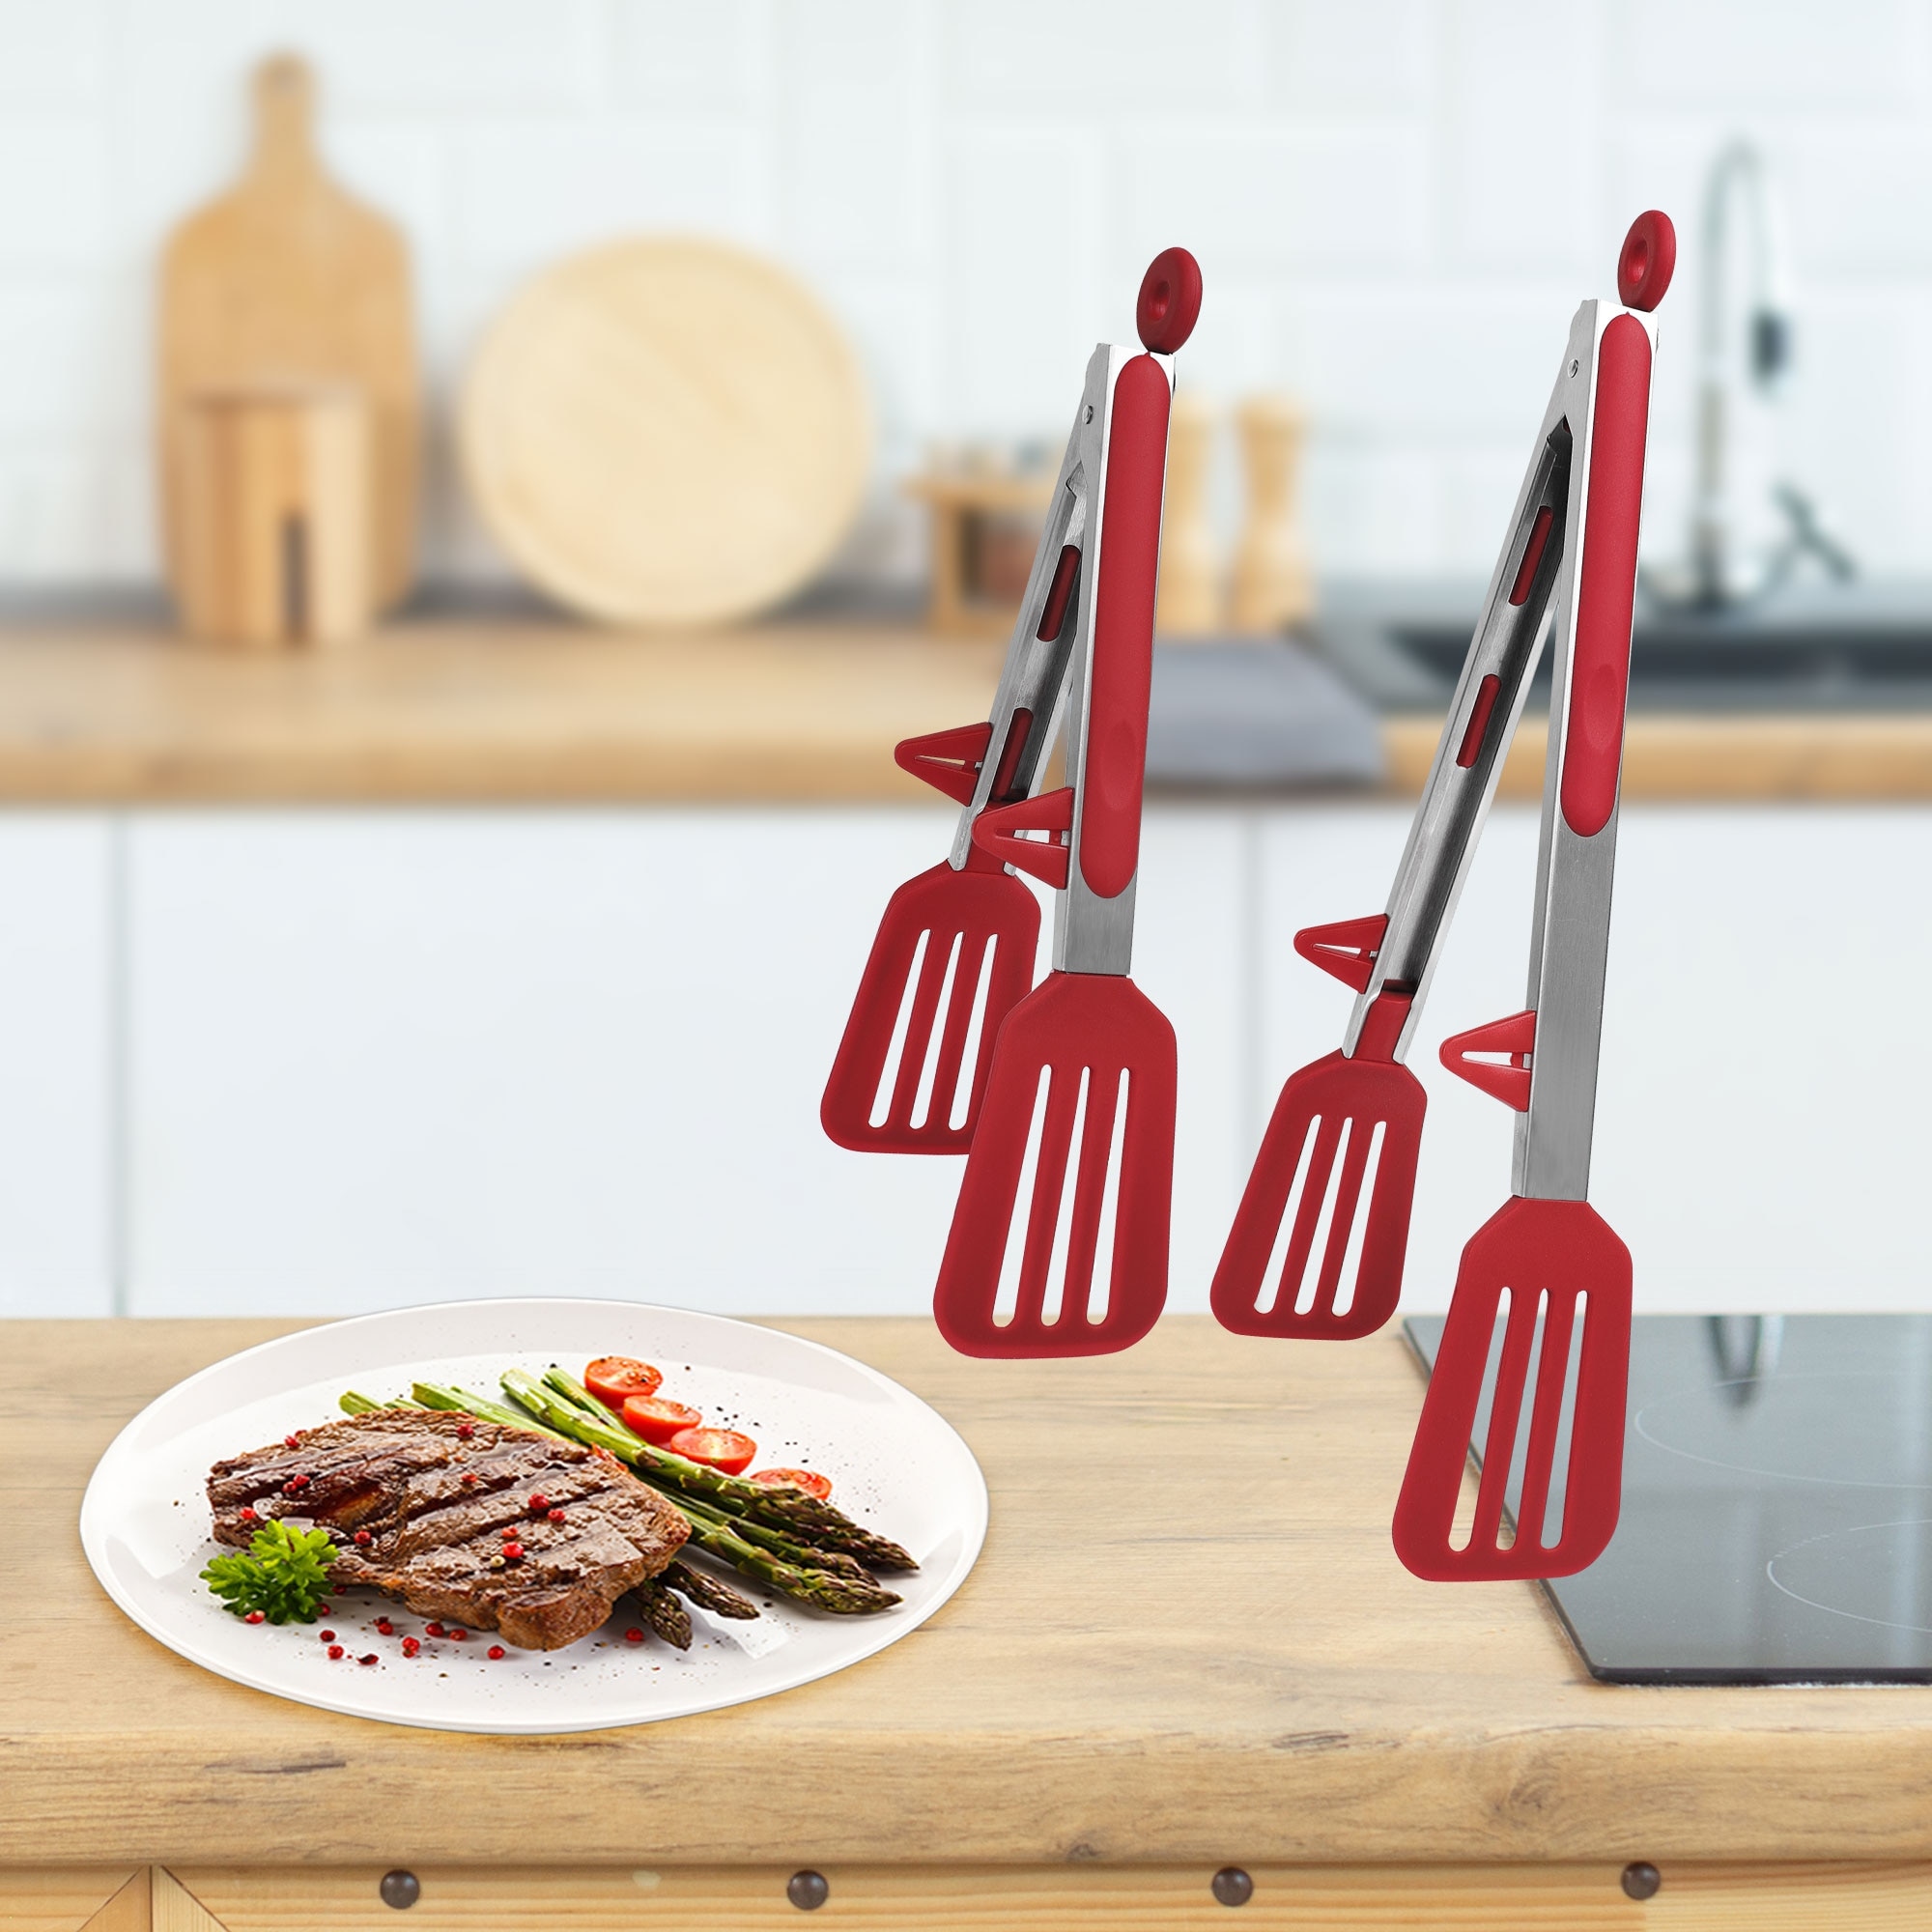 https://ak1.ostkcdn.com/images/products/is/images/direct/aa338fa62ffd6dc234e175da5b988a77a9f2f918/Kitchen-Tong-Set-for-Cooking-Stainless-Steel-Tongs-with-Stands-Silicone-2Pcs.jpg